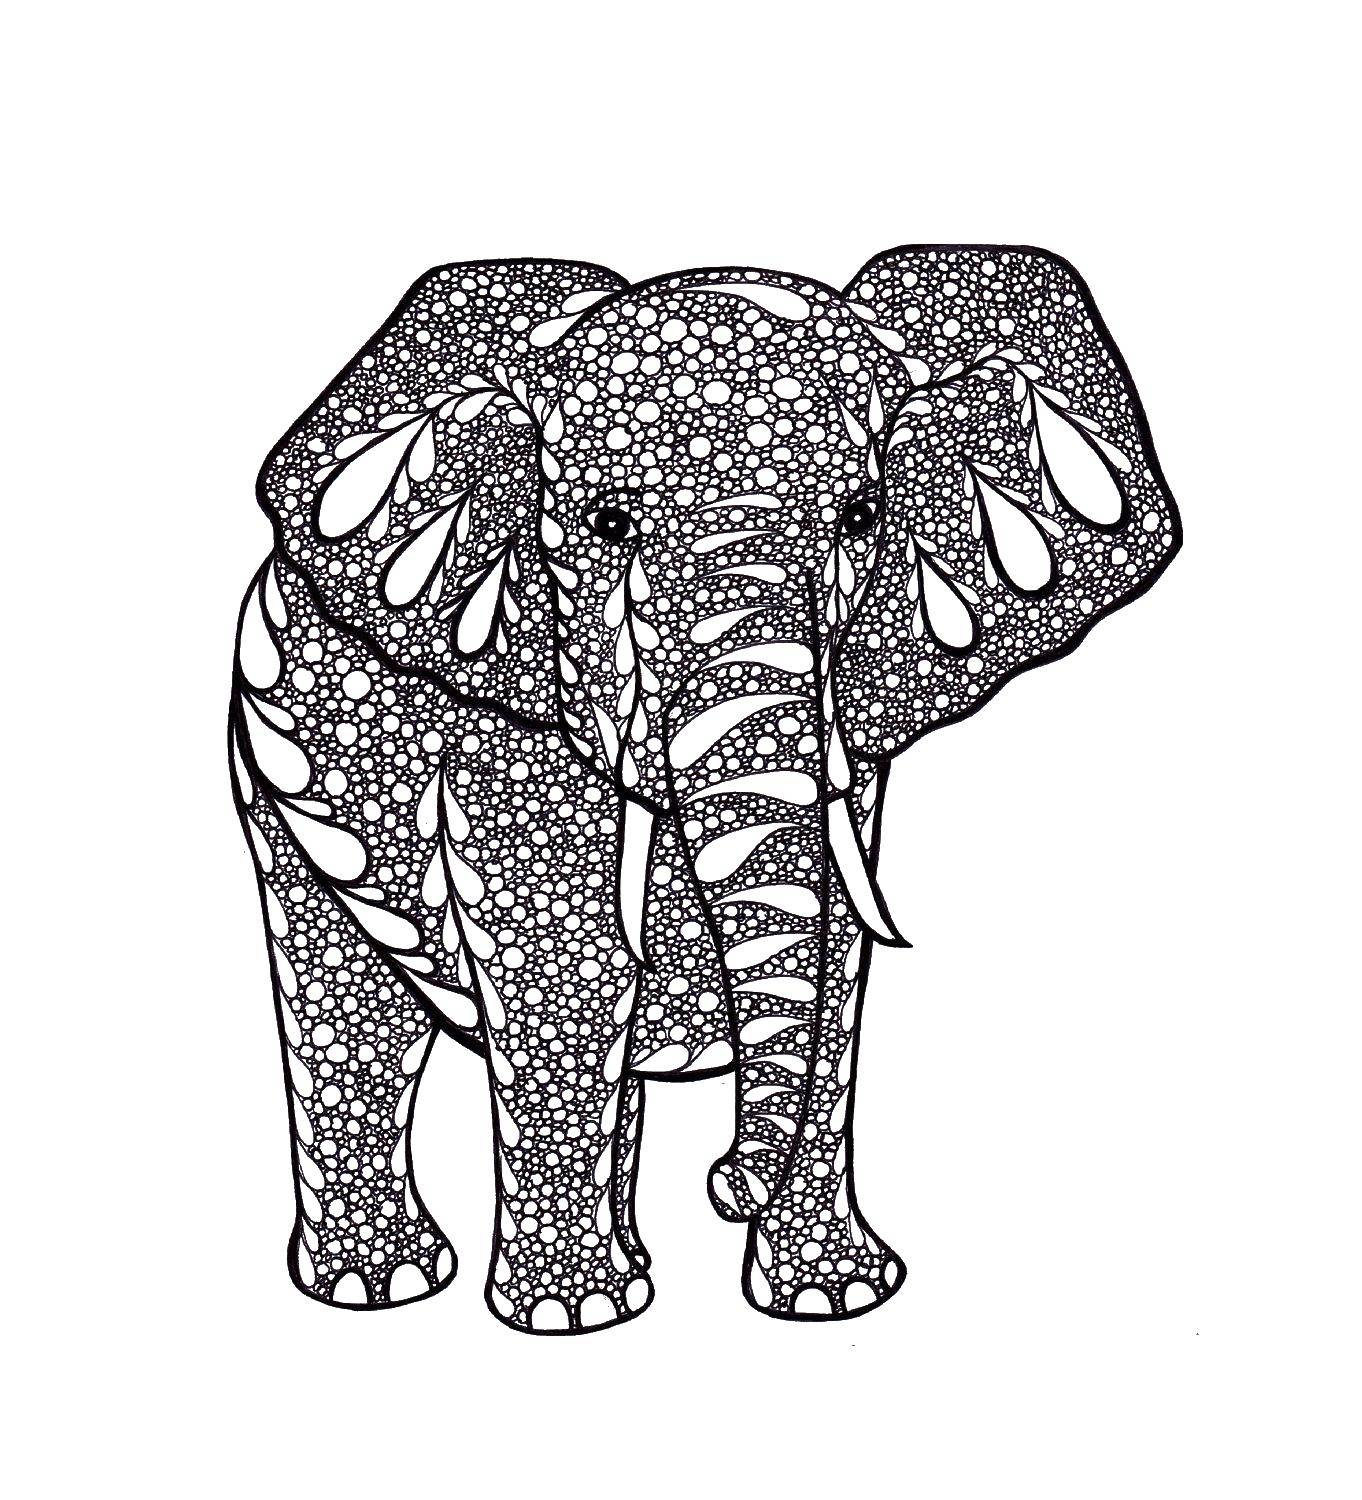 Coloring Elephant. Category Bathroom with shower. Tags:  antisress, patterns, shapes, elephant.